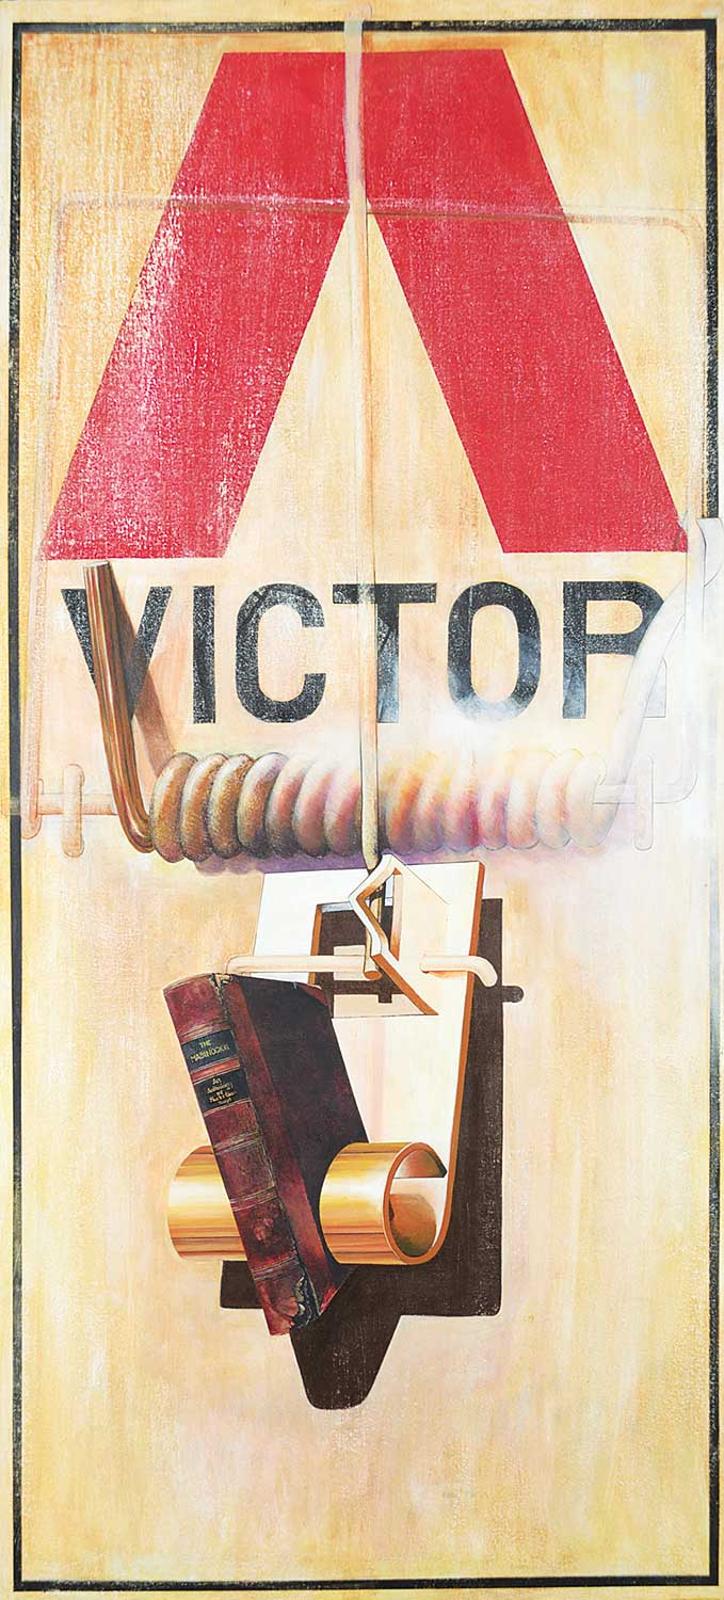 Phil Sheil (1961) - Untitled - Victor Trap